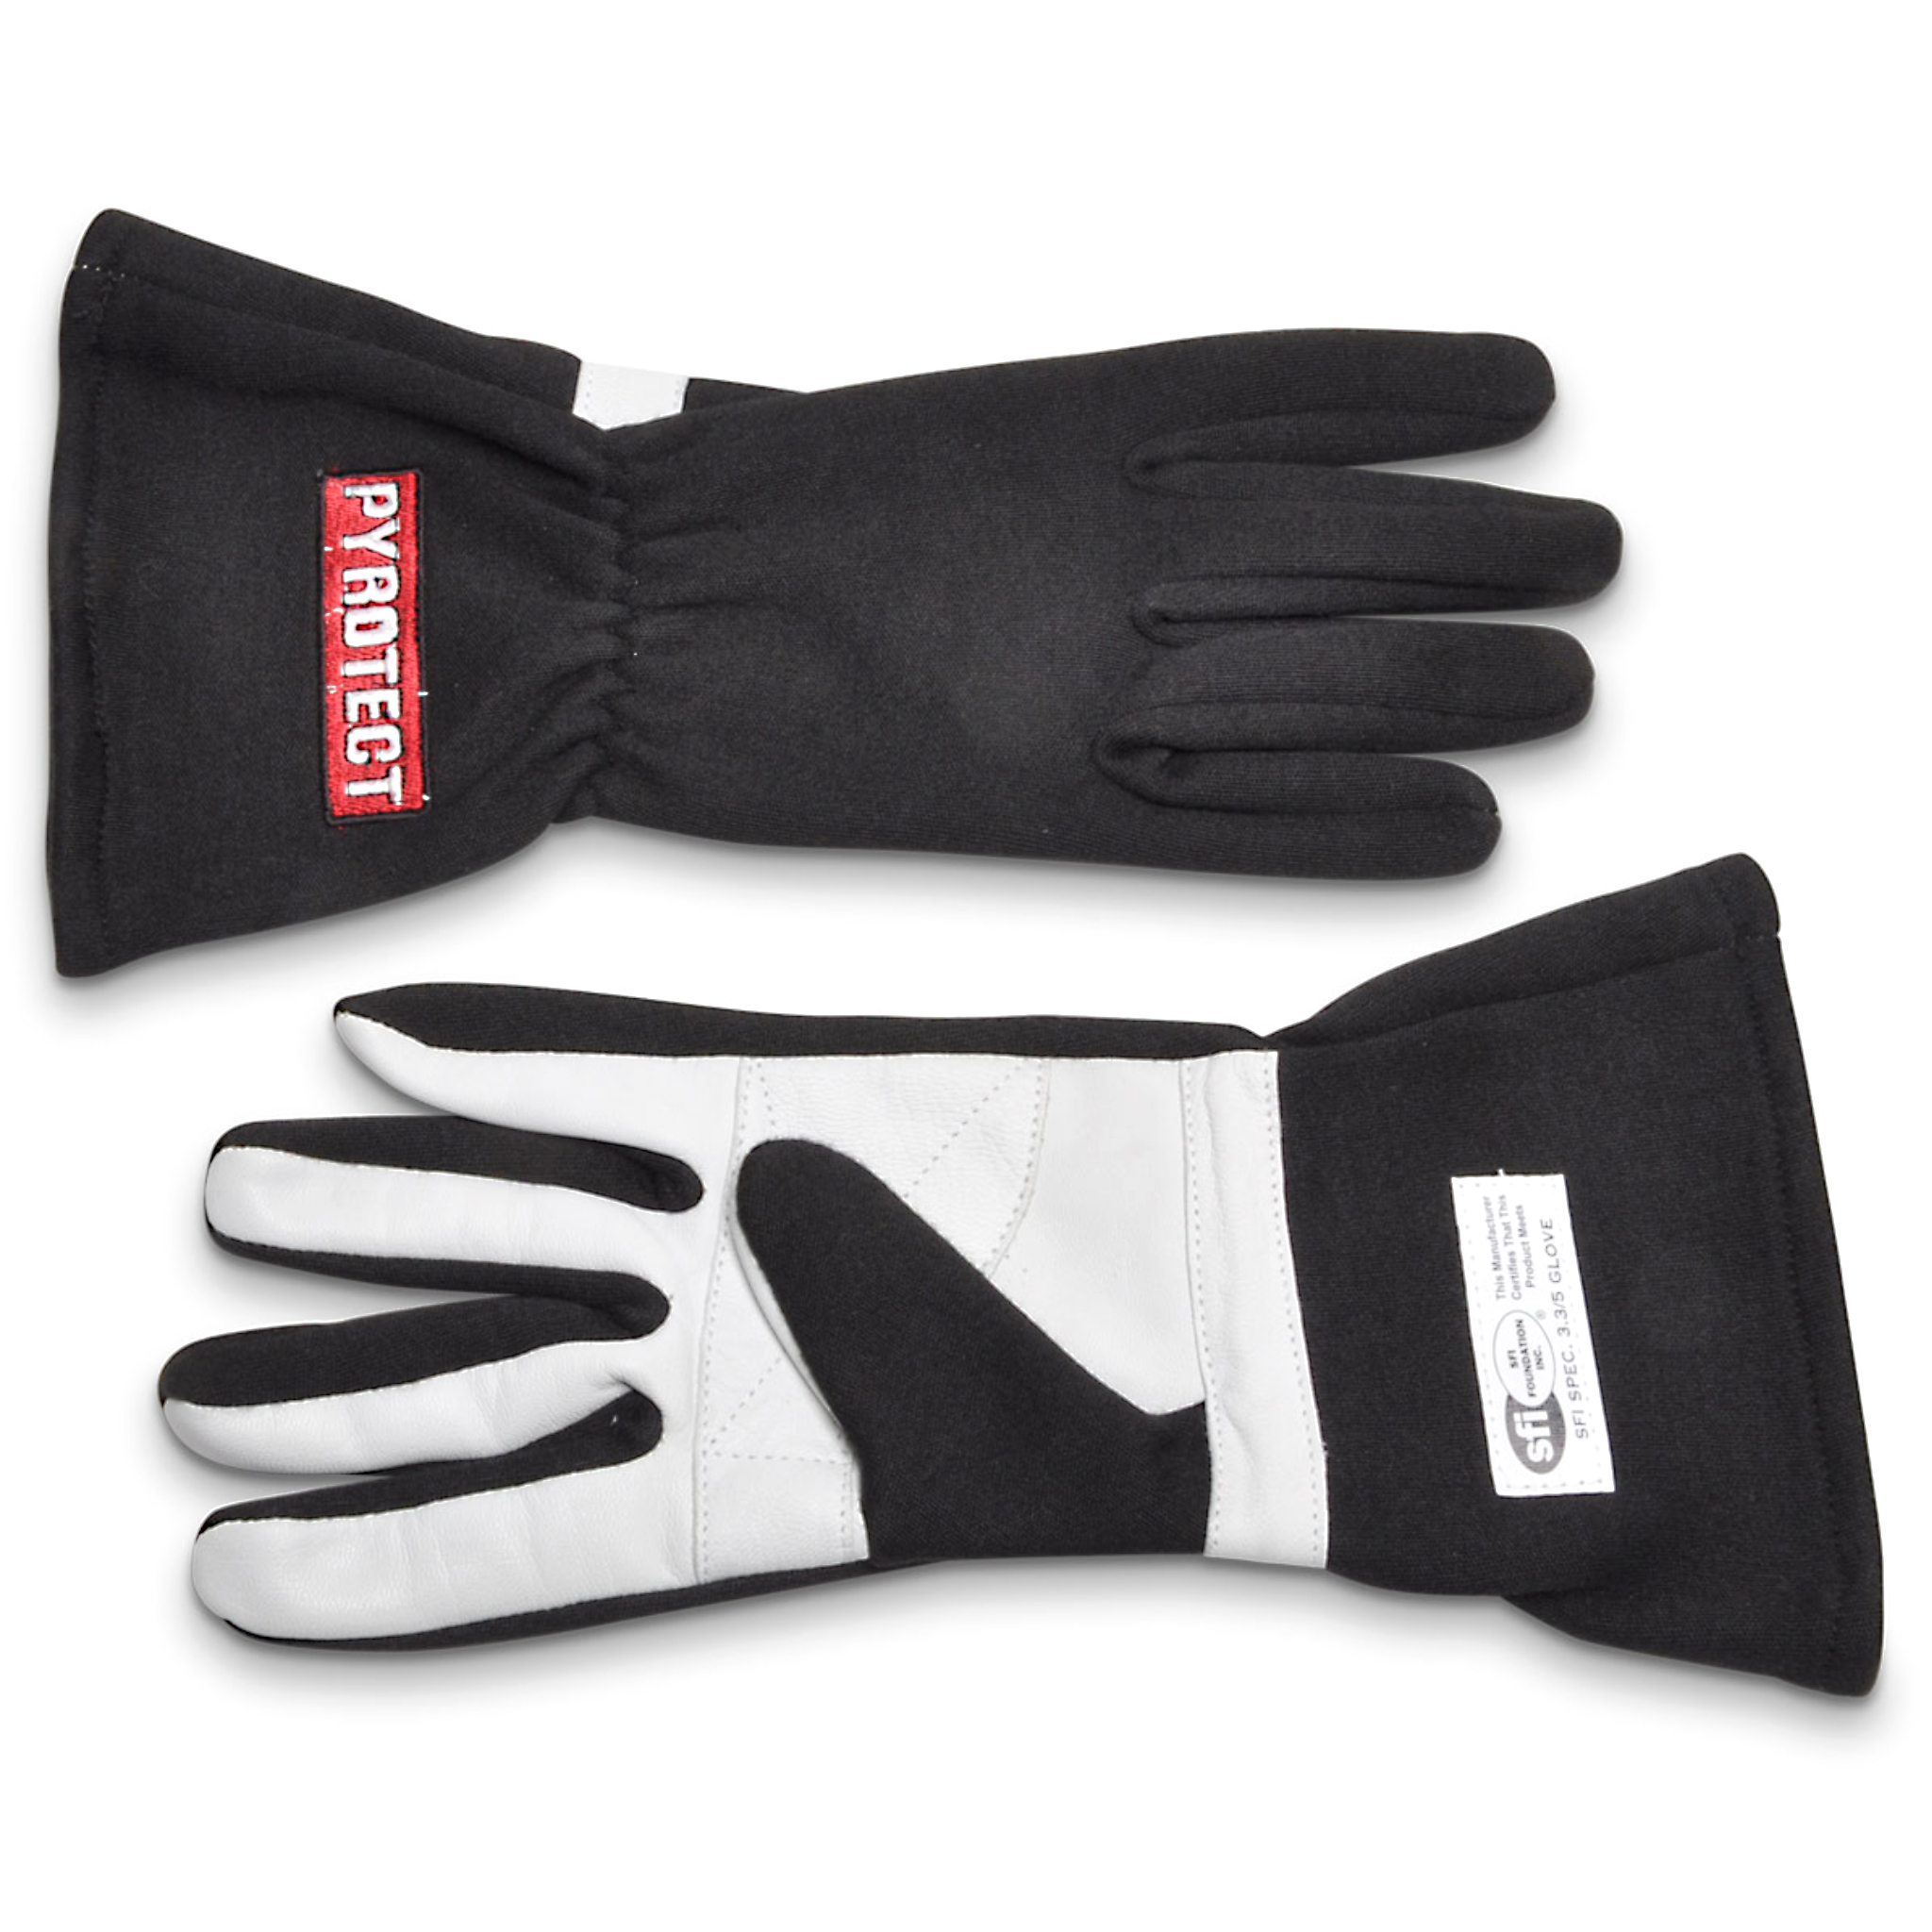 Pyrotect Safety GS200320 Gloves, Driving, SFI 3.3/5, Double Layer, Sport, Nomex, Black, Medium, Pair